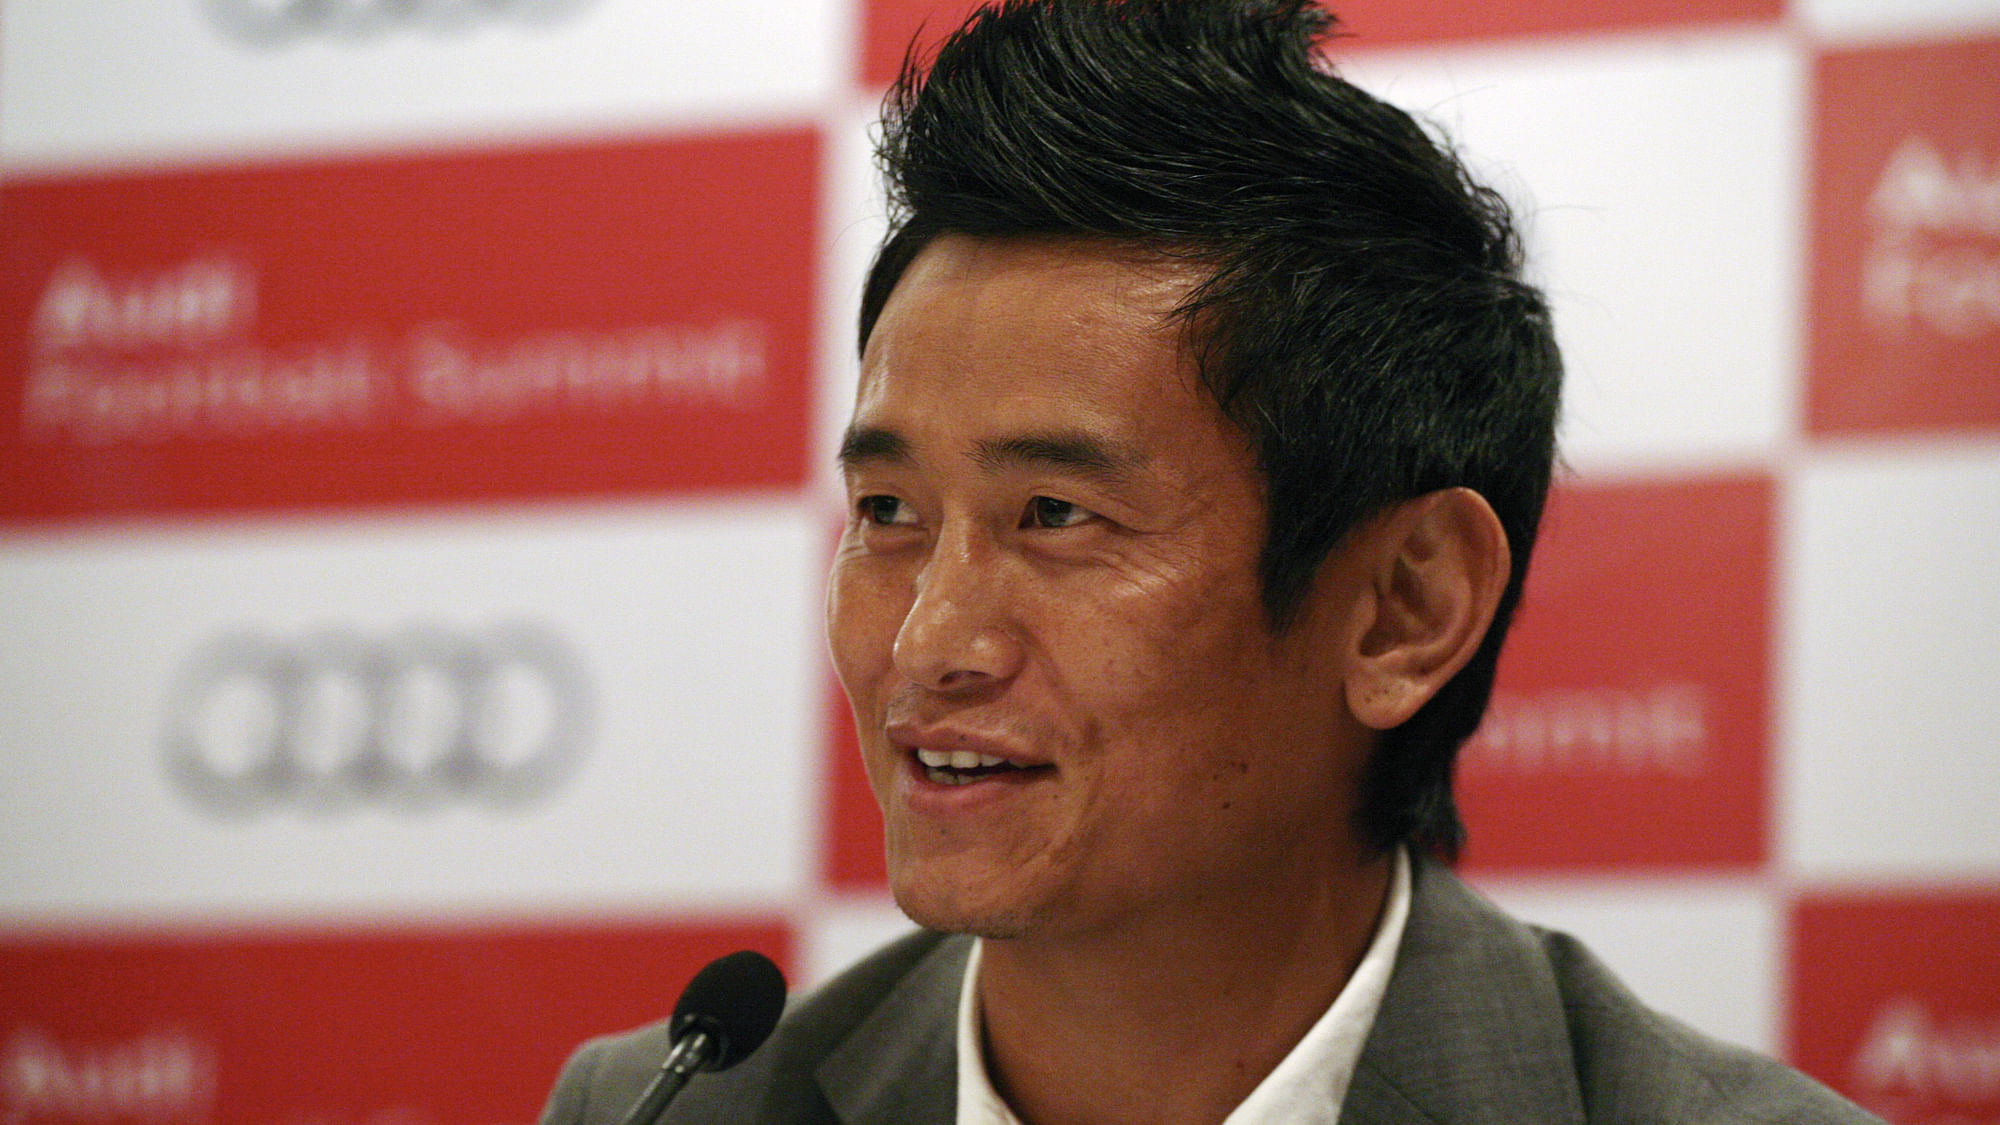 Former footballer Bhaichung Bhutia on Thursday, 26 April, launched his political party at the Press Club of India in New Delhi, two months after quitting Trinamool Congress.